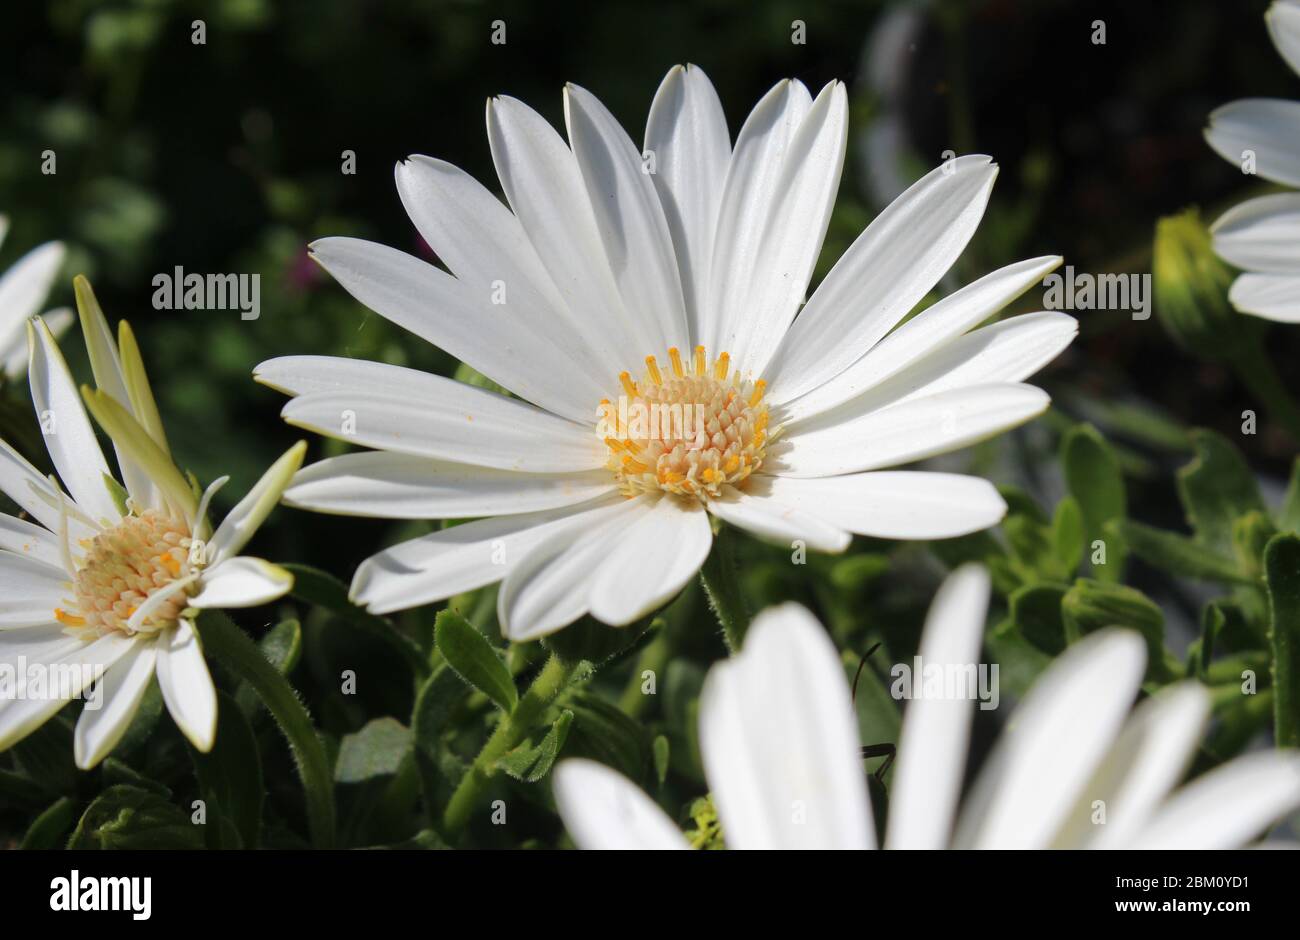 Pure white Osteospermum flowers, growing outdoors, in close up. Also known as Cape Daisy. Stock Photo